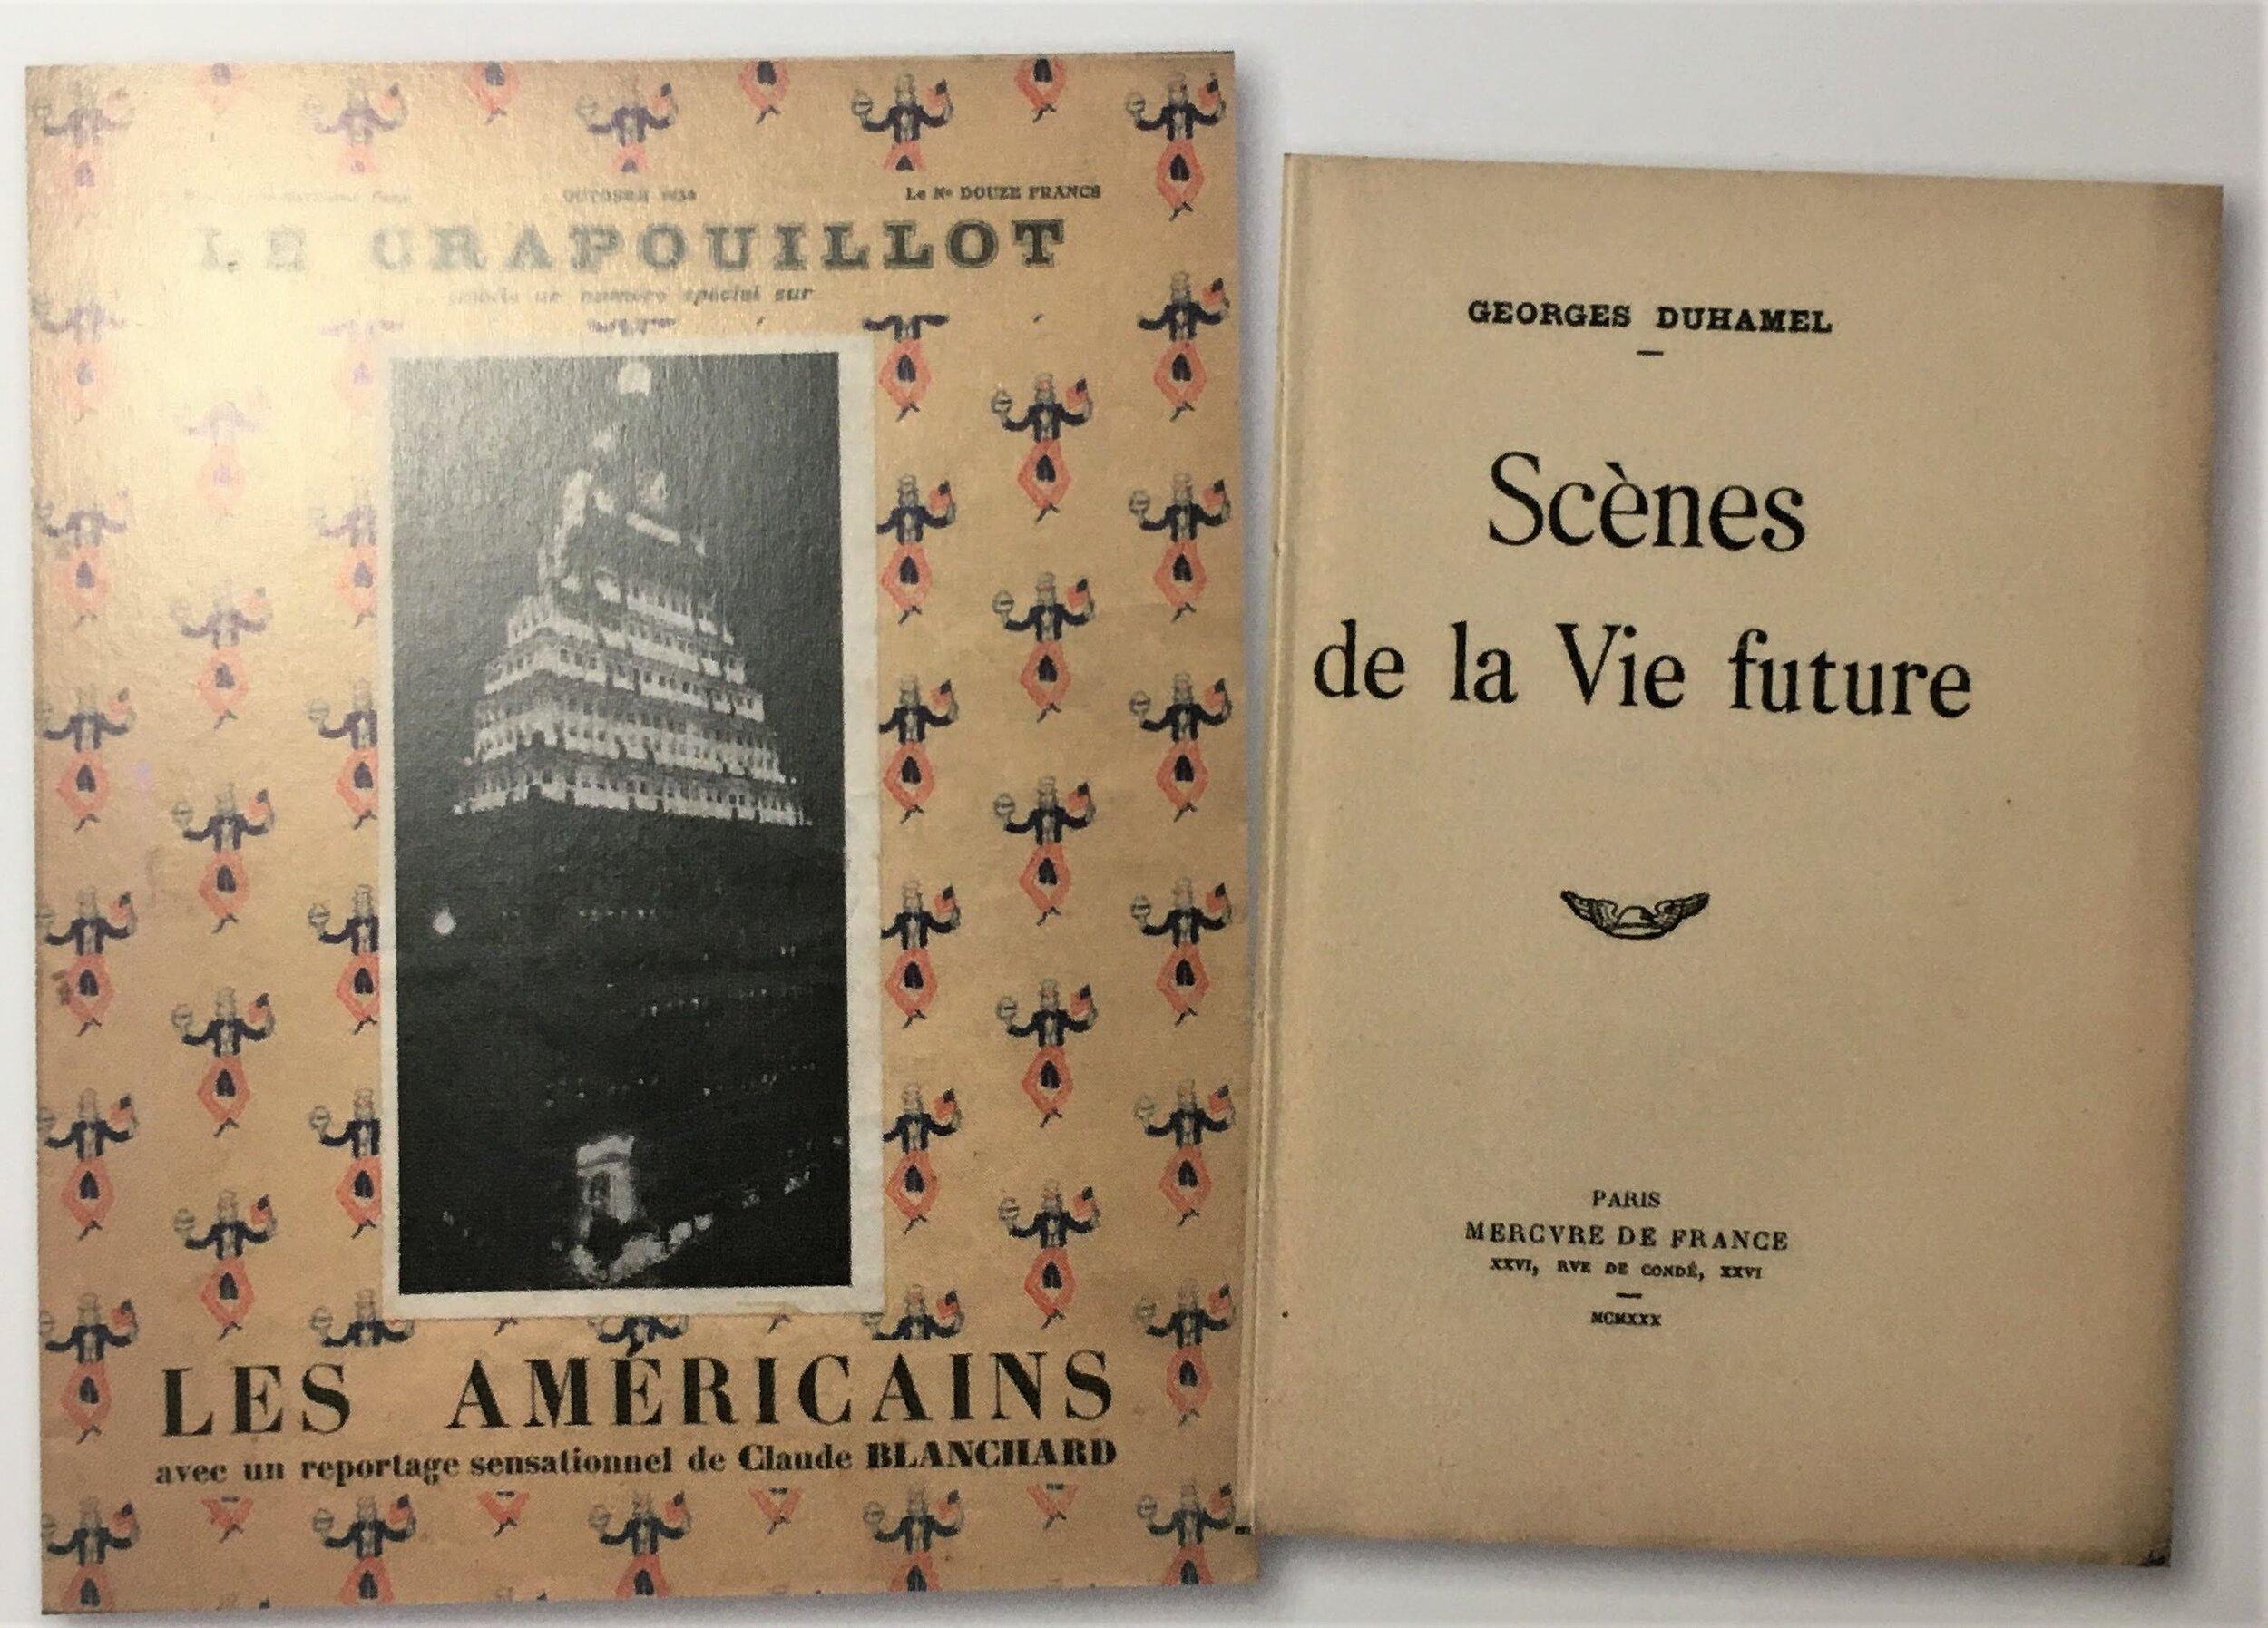  Herge heavily-utilised the 1930 book  Scenes de la vie future  ( Scenes From Future Life ) by Georges Duhamel and a special edition of the magazine  Le Crapouillot  (literally  The Motar Shell)  dedicated to American life to inform his understanding